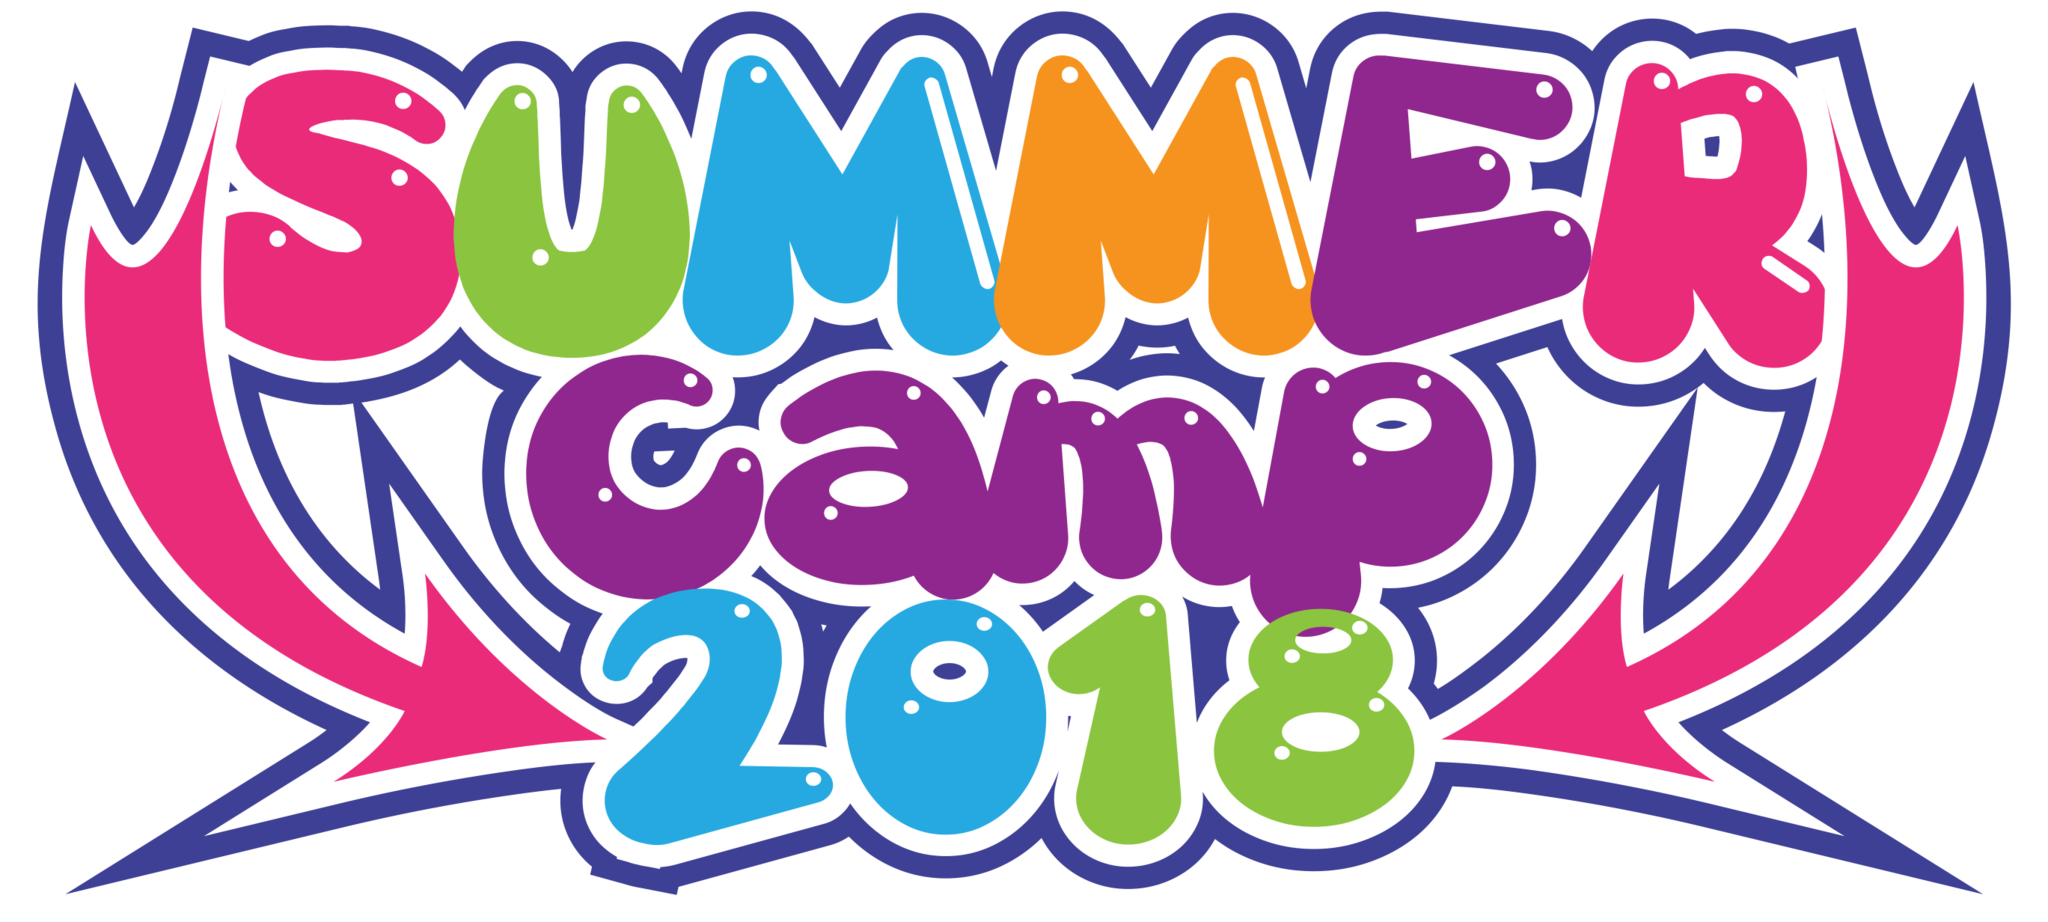 share clipart about Dance Academy - Summer Camp 2018, Find more high qualit...